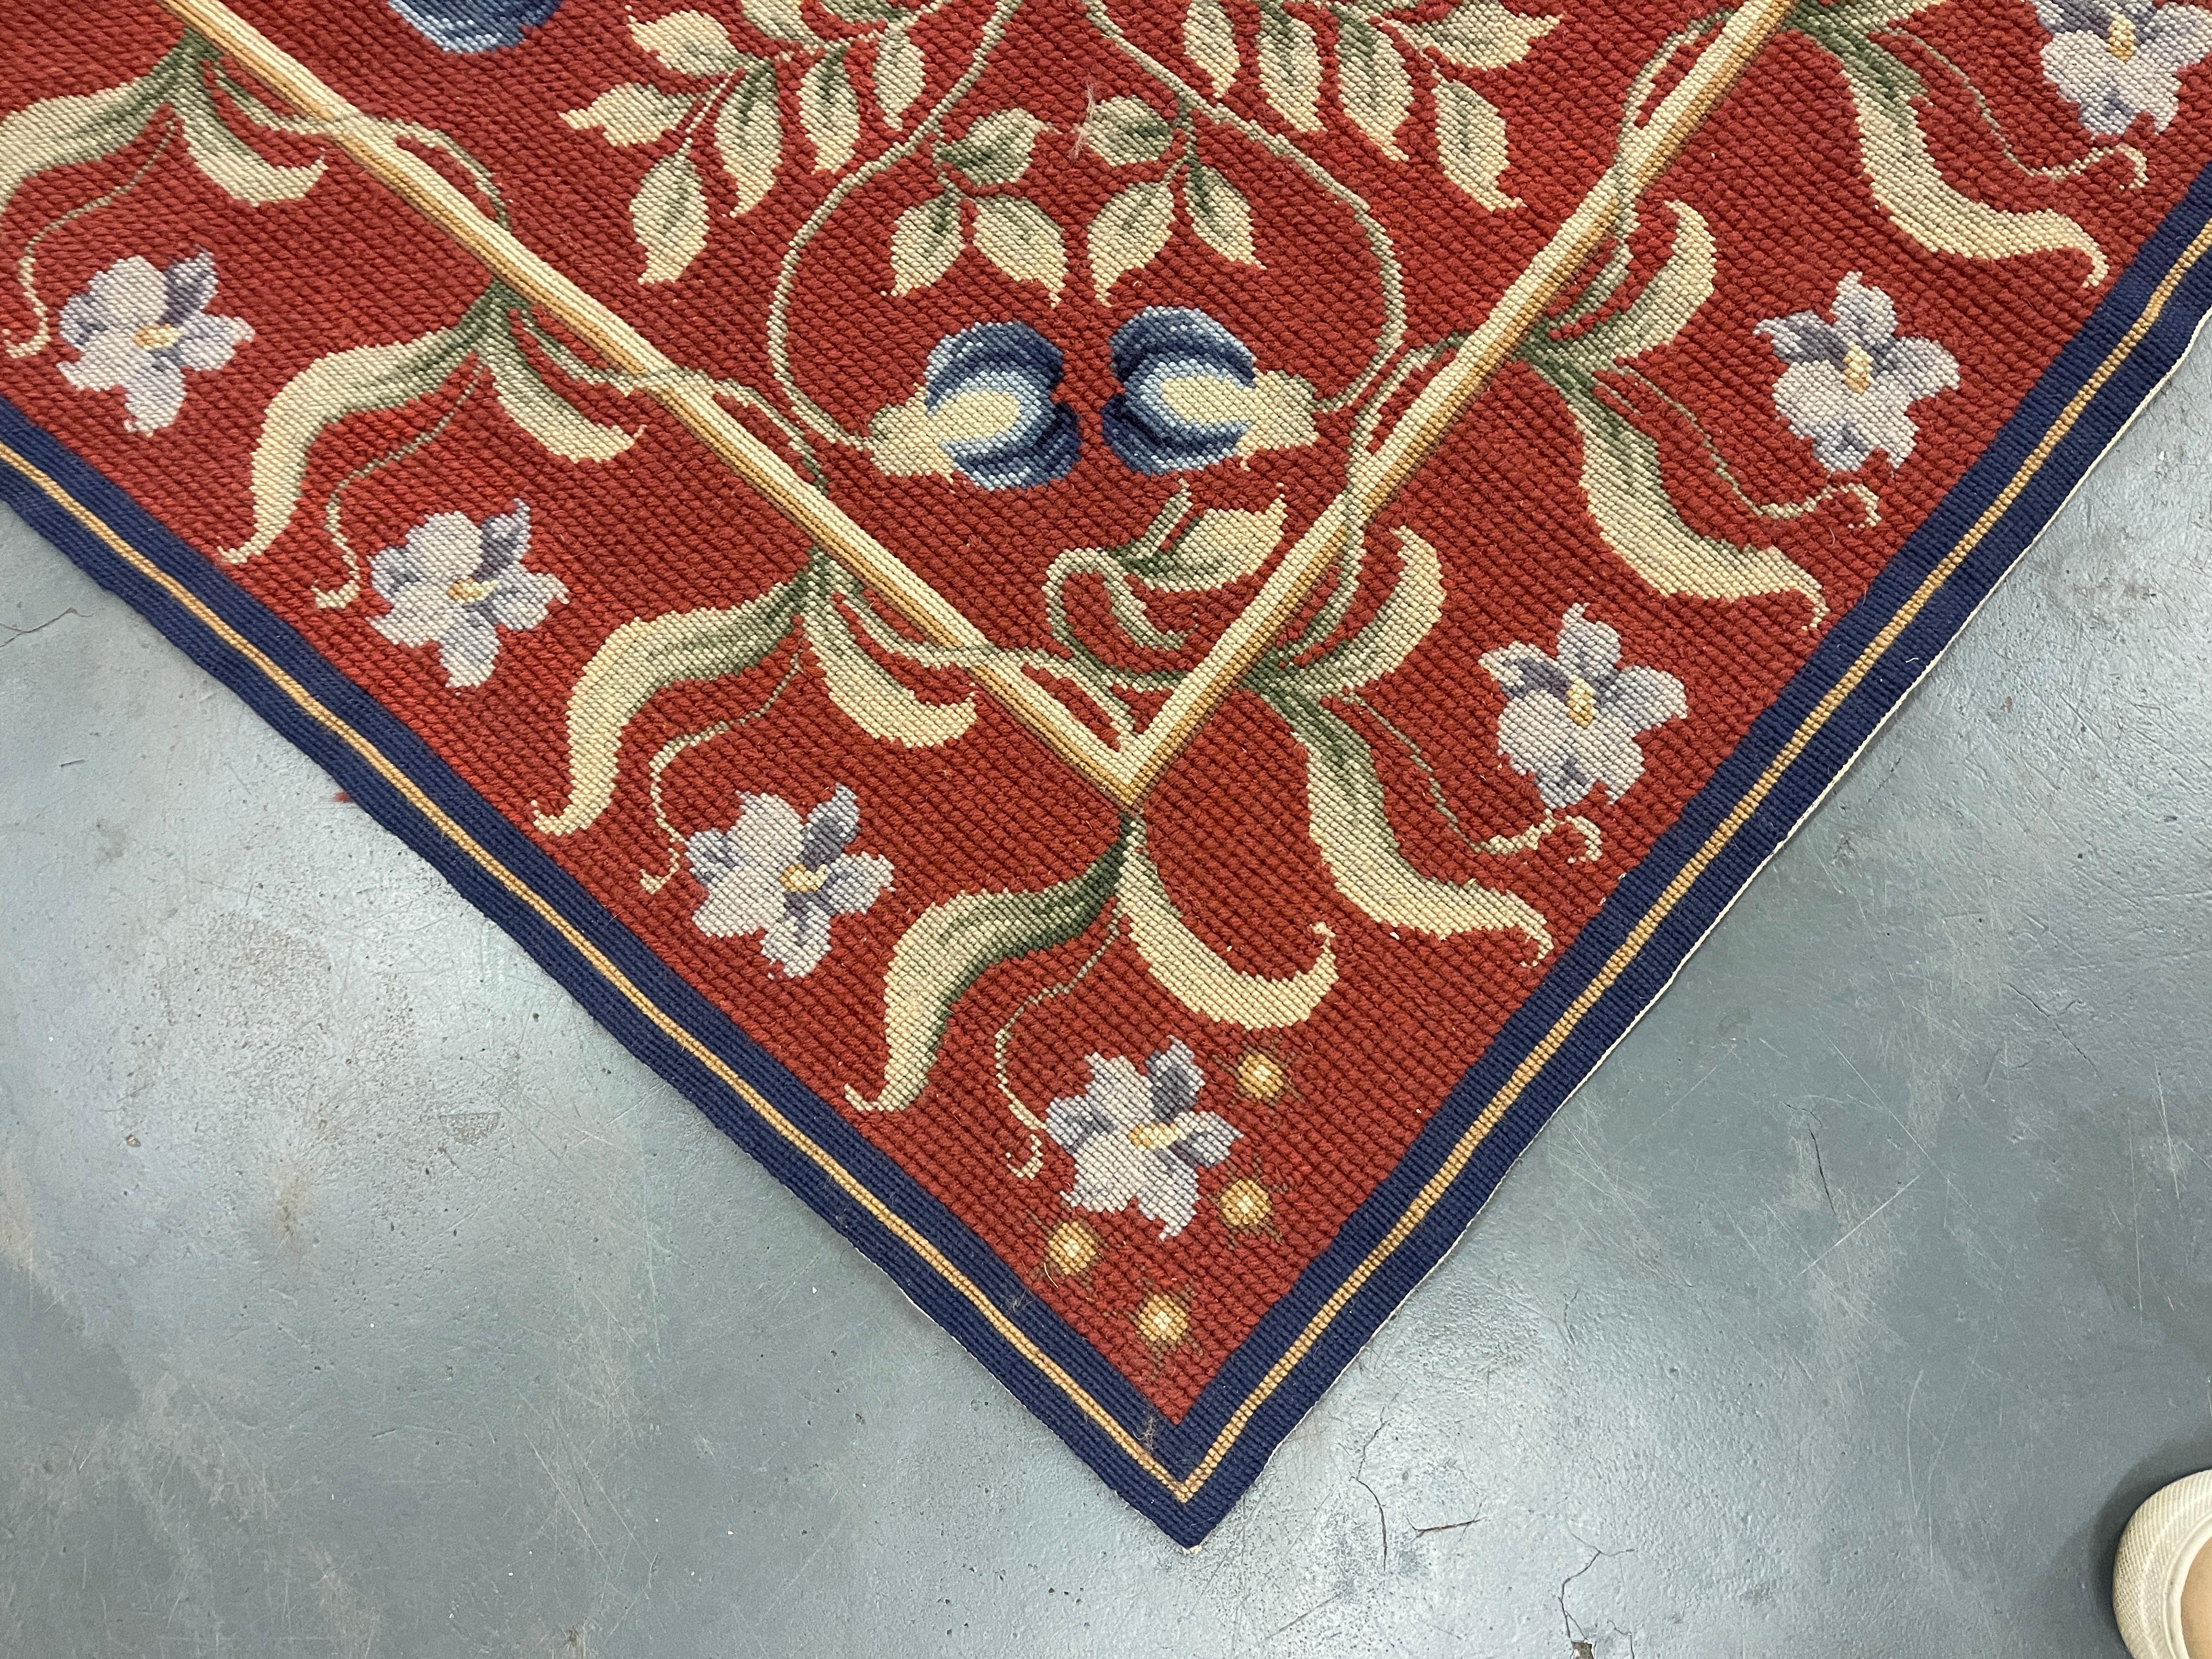 This fantastic area rug has been handwoven with a beautiful asymmetrical floral design woven on a red background with cream-green and ivory accents. This elegant piece's colour and design make it the perfect accent rug.
This style of rug is best